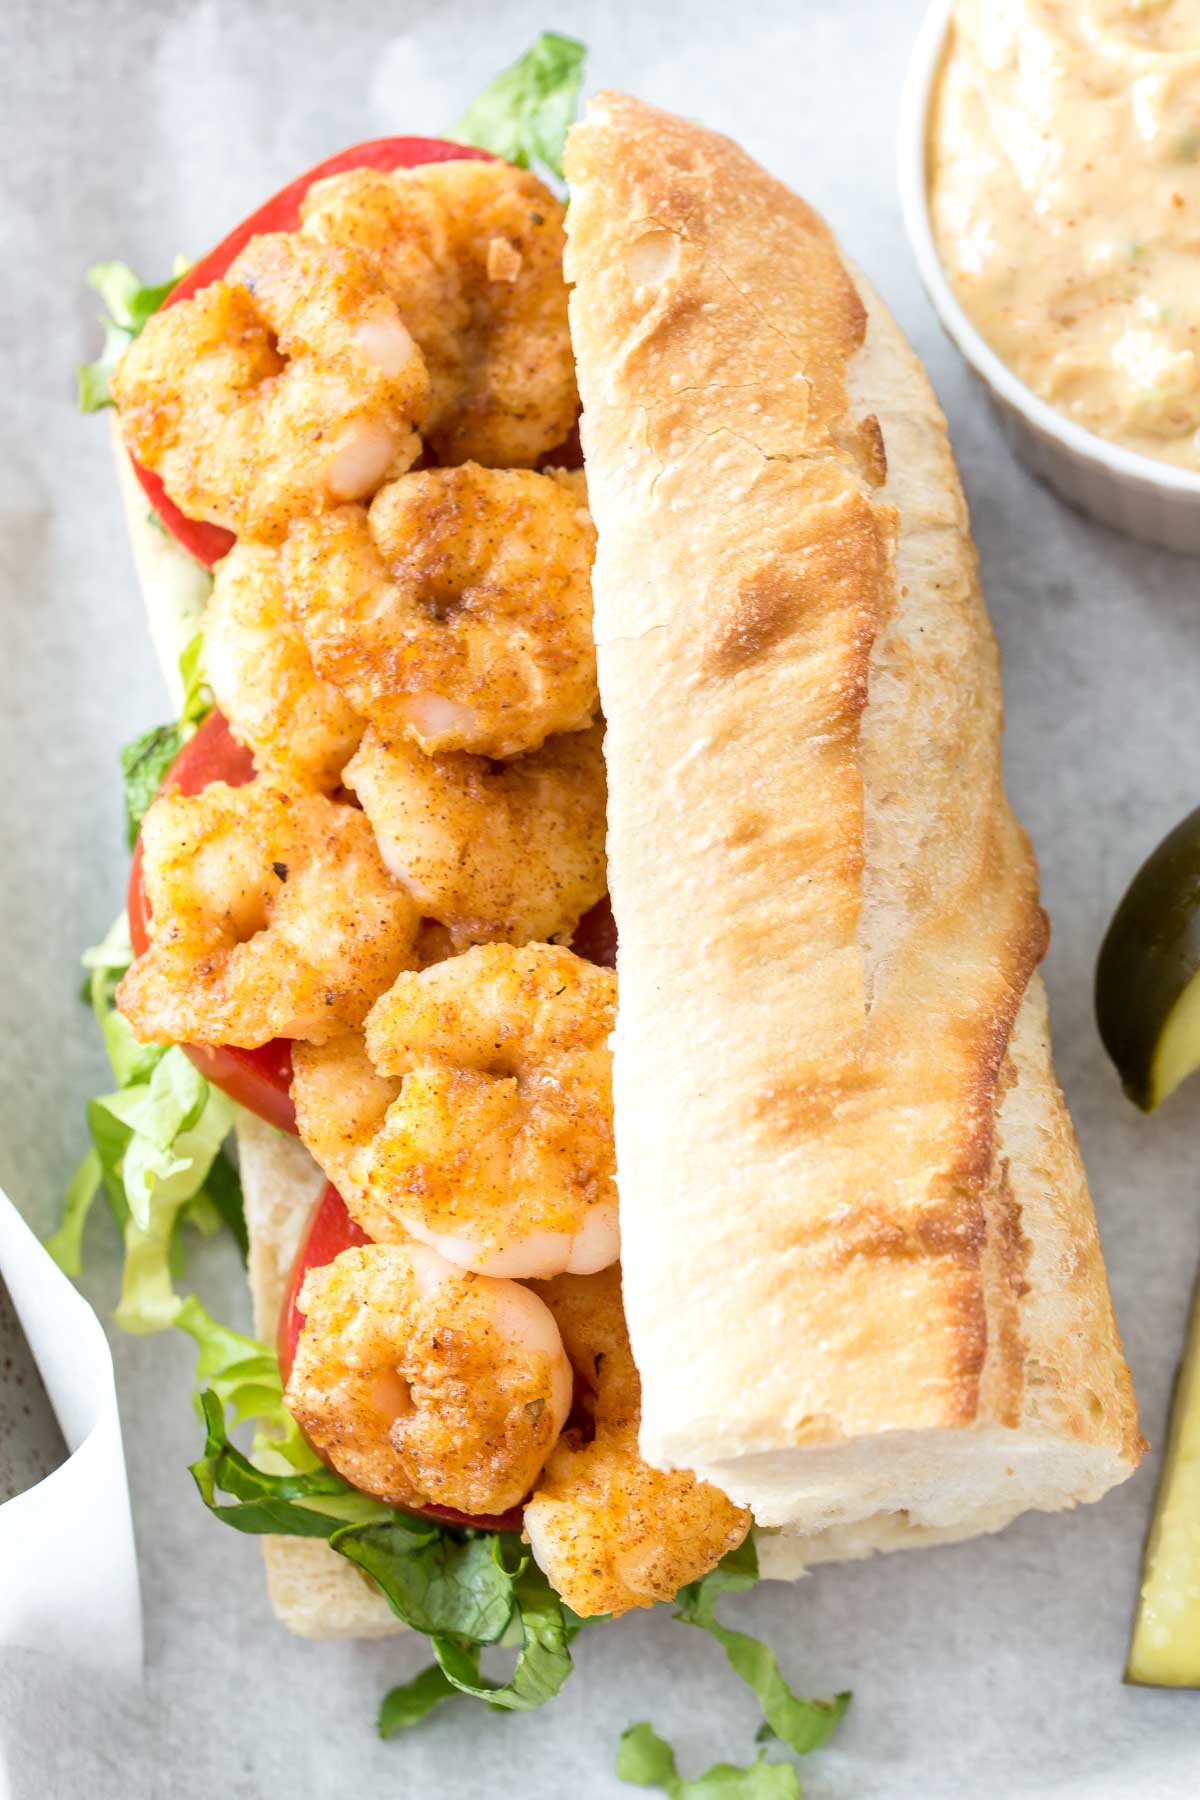 A shrimp po boy sandwich, featuring pan fried shrimp, shredded green lettuce and sliced tomatoes on a demi-baguette, homemade Cajun remoulade sauce in a white ramekin and two pickle spears to the side on a baking sheet lined with parchment paper